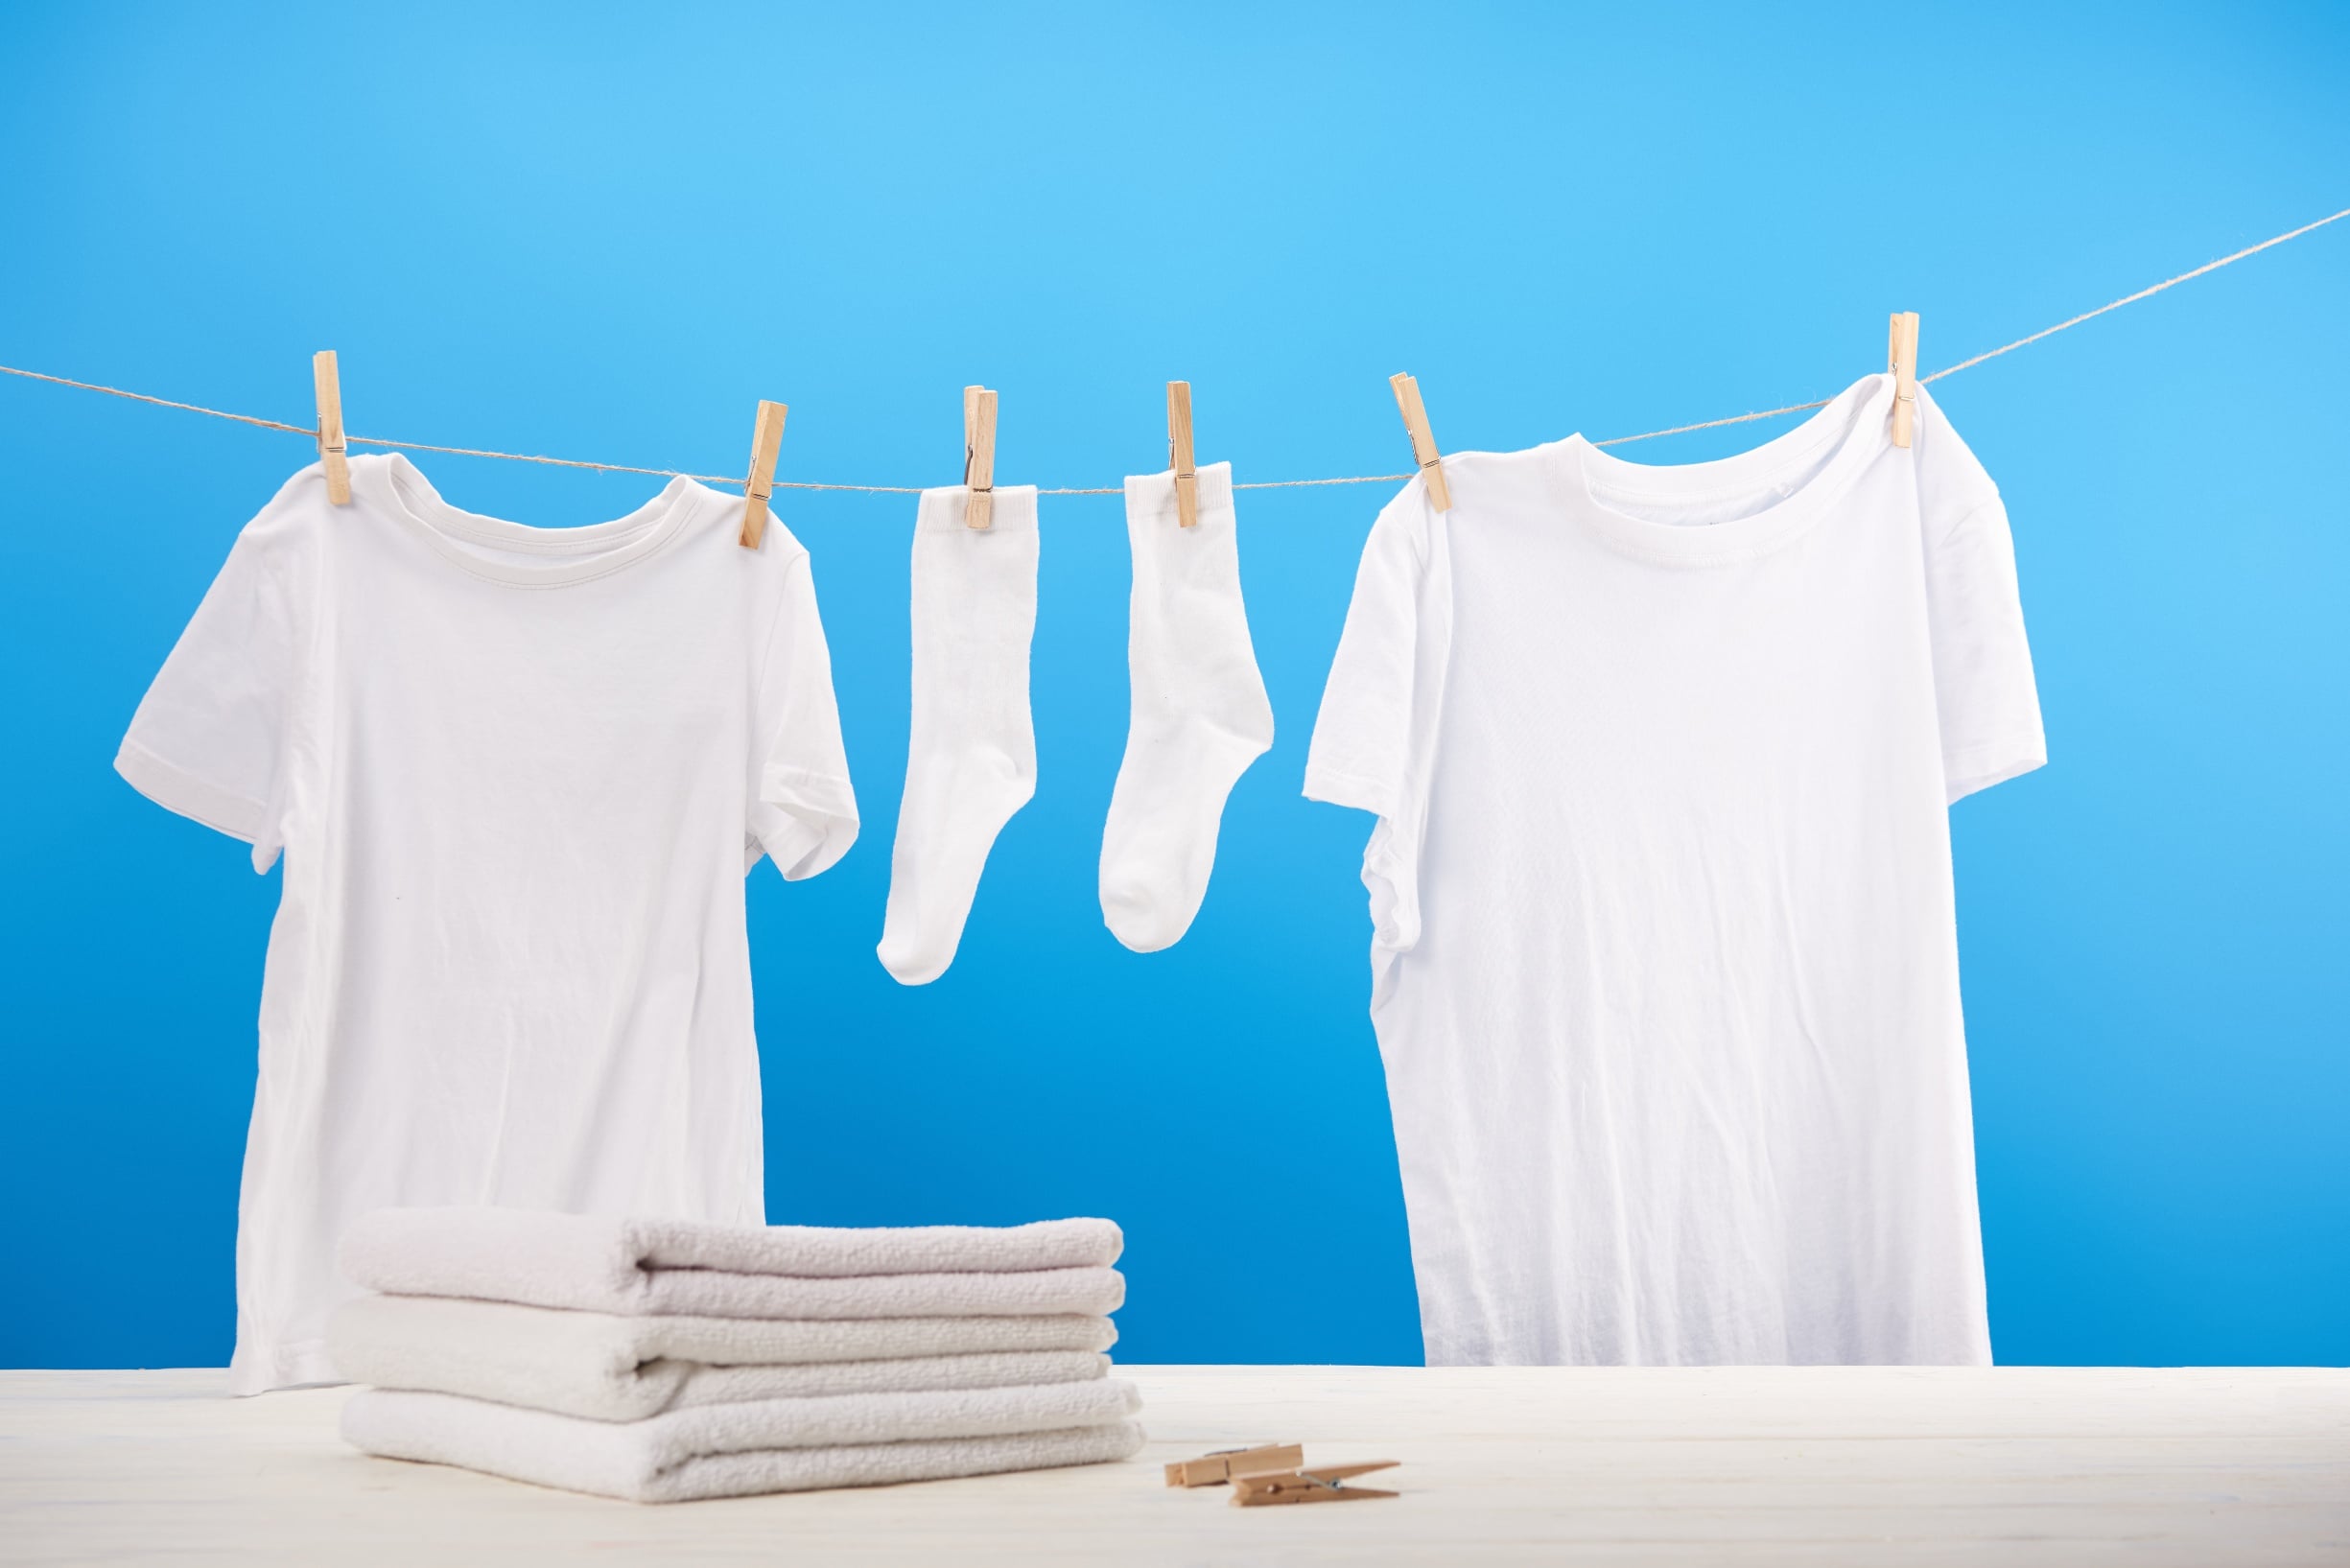 How to Wash Colored Clothes & Keep Them from Fading